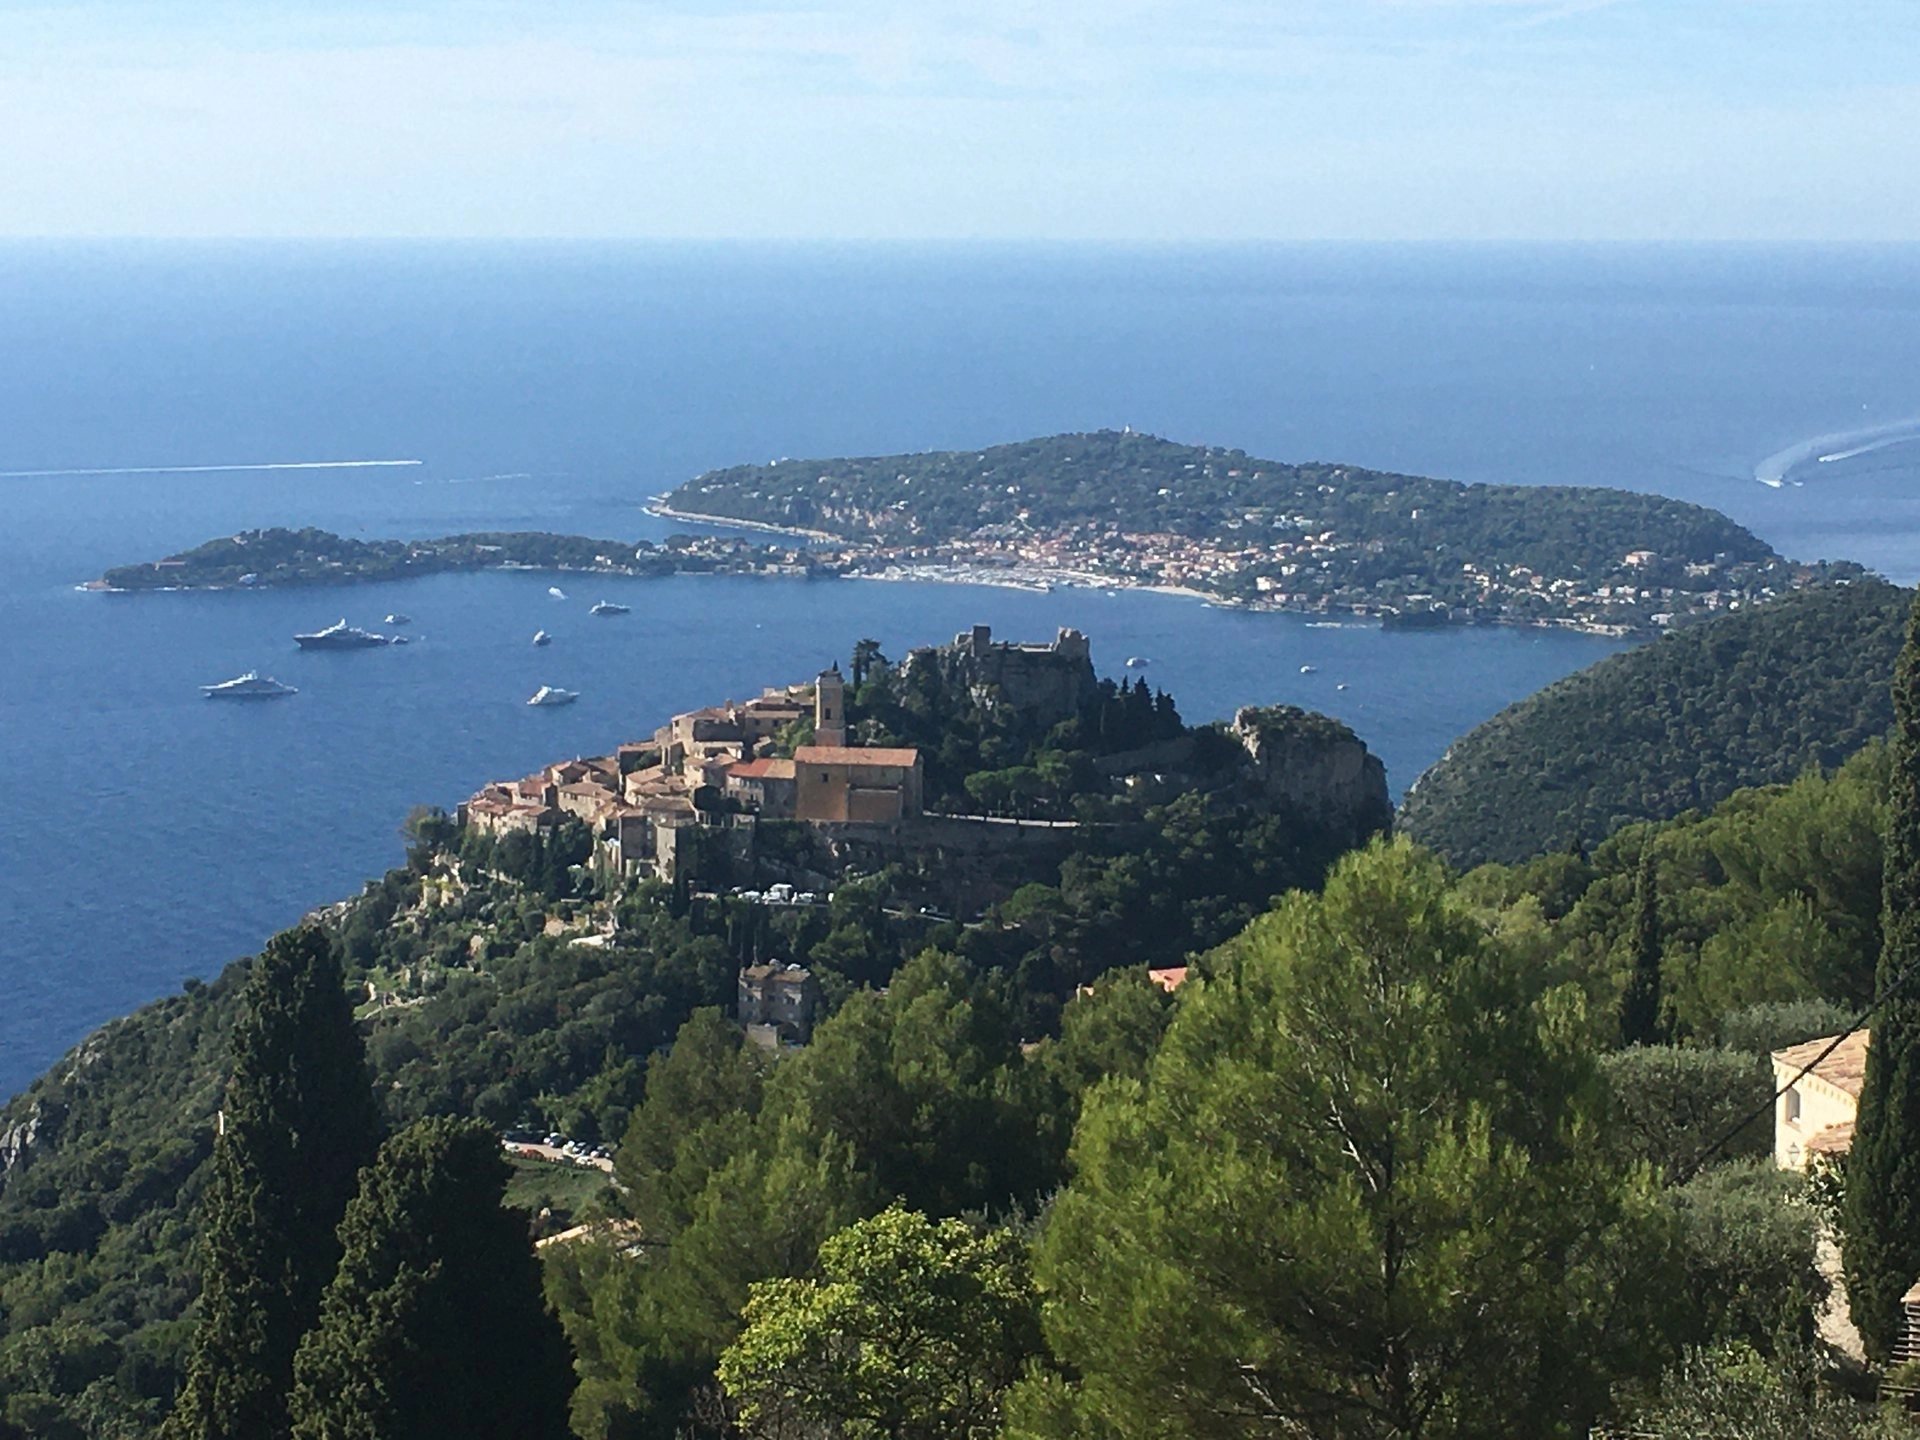 Hotel close to Monaco with 9 % rentability